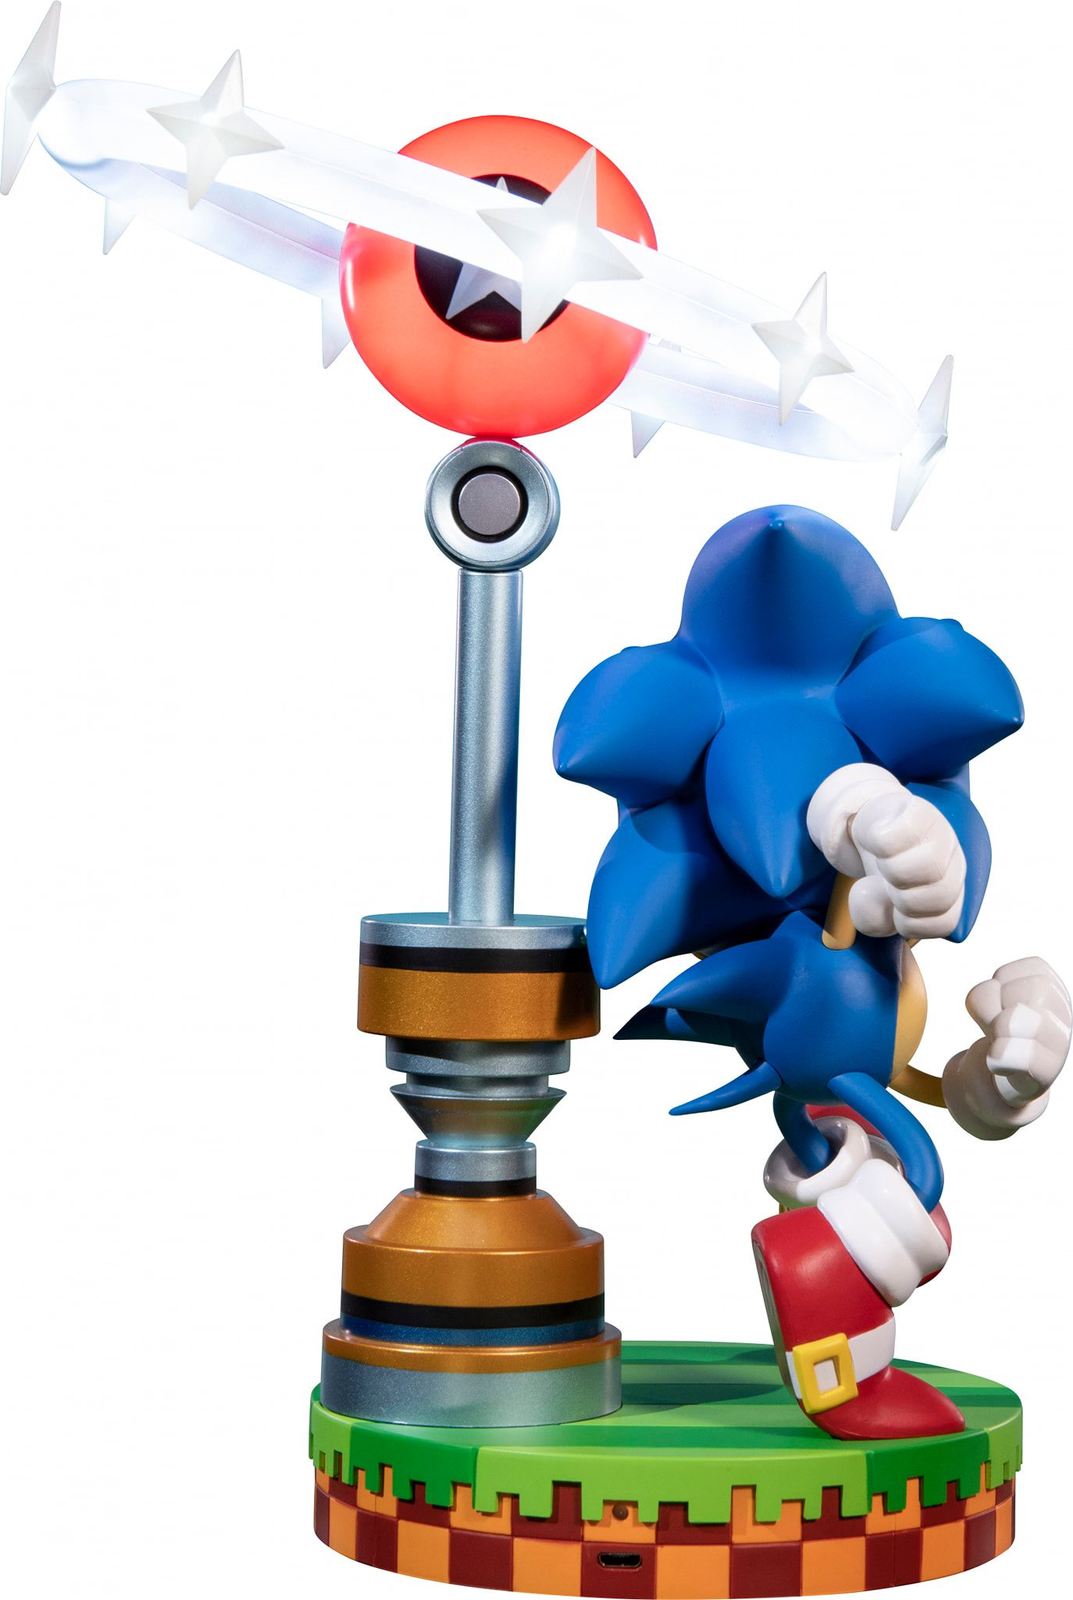 Sonic the Hedgehog - Sonic Collector’s Edition 11” PVC Statue